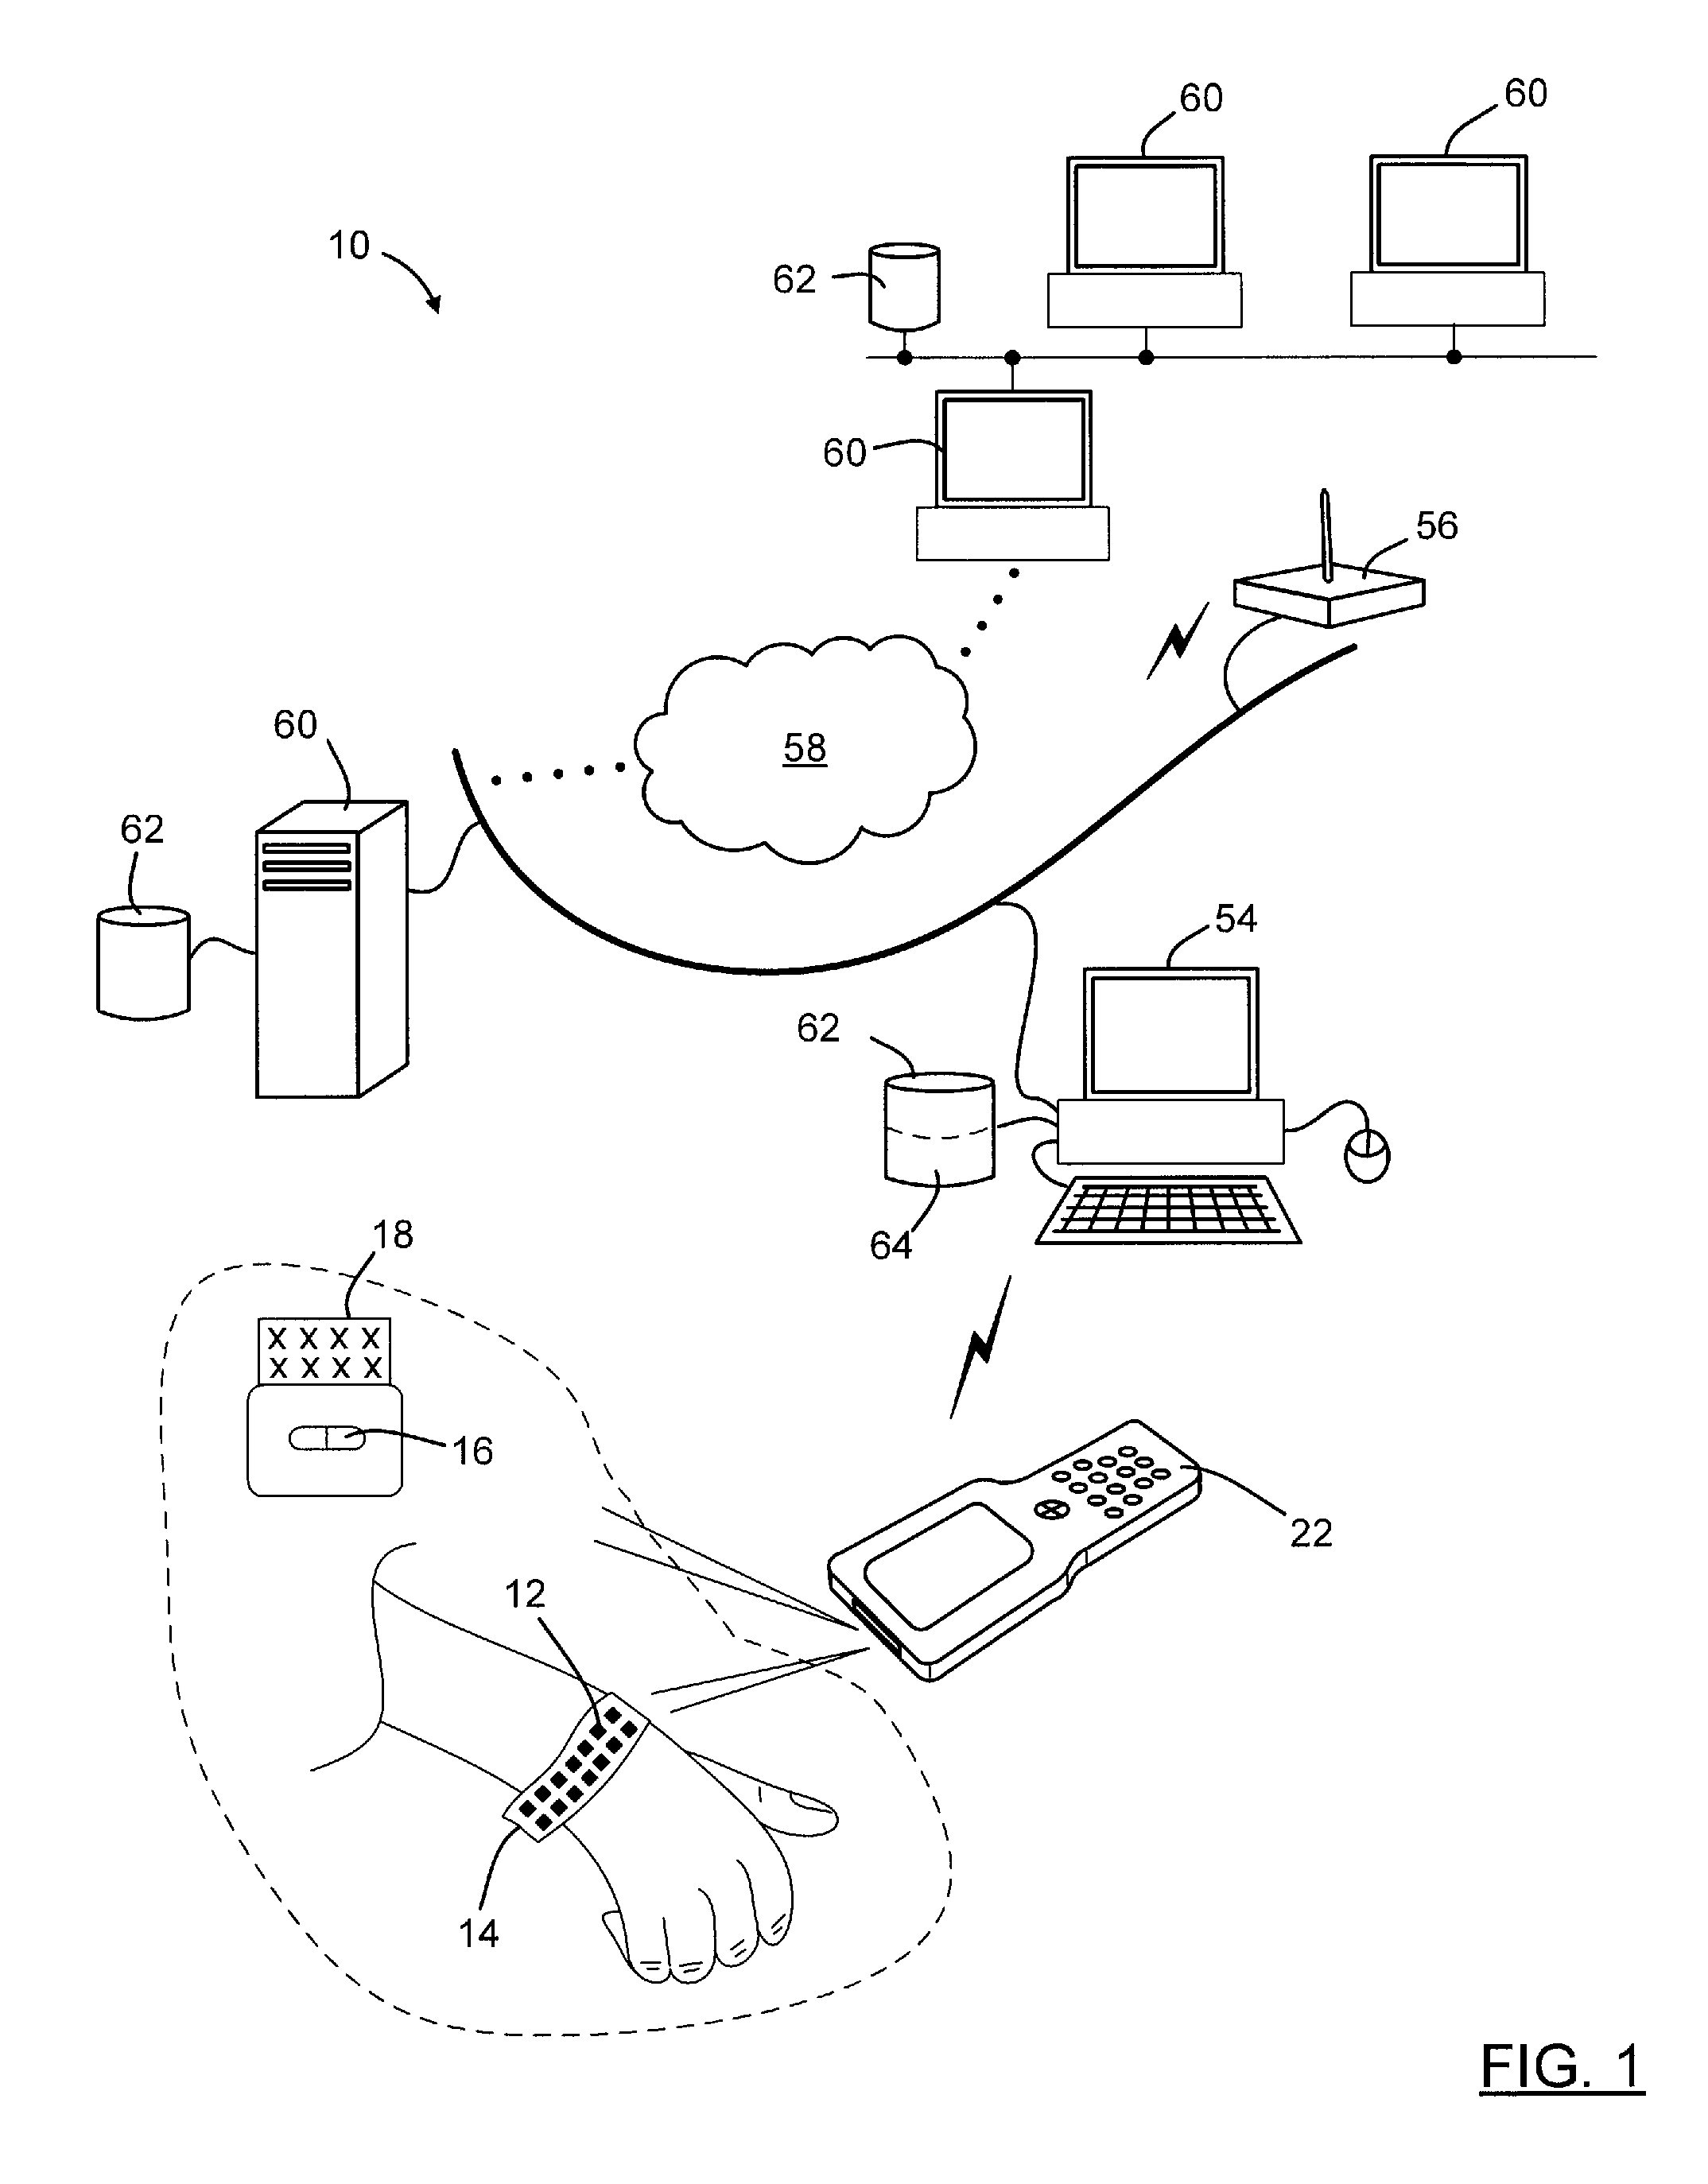 Optical imager and method for correlating a medication package with a patient